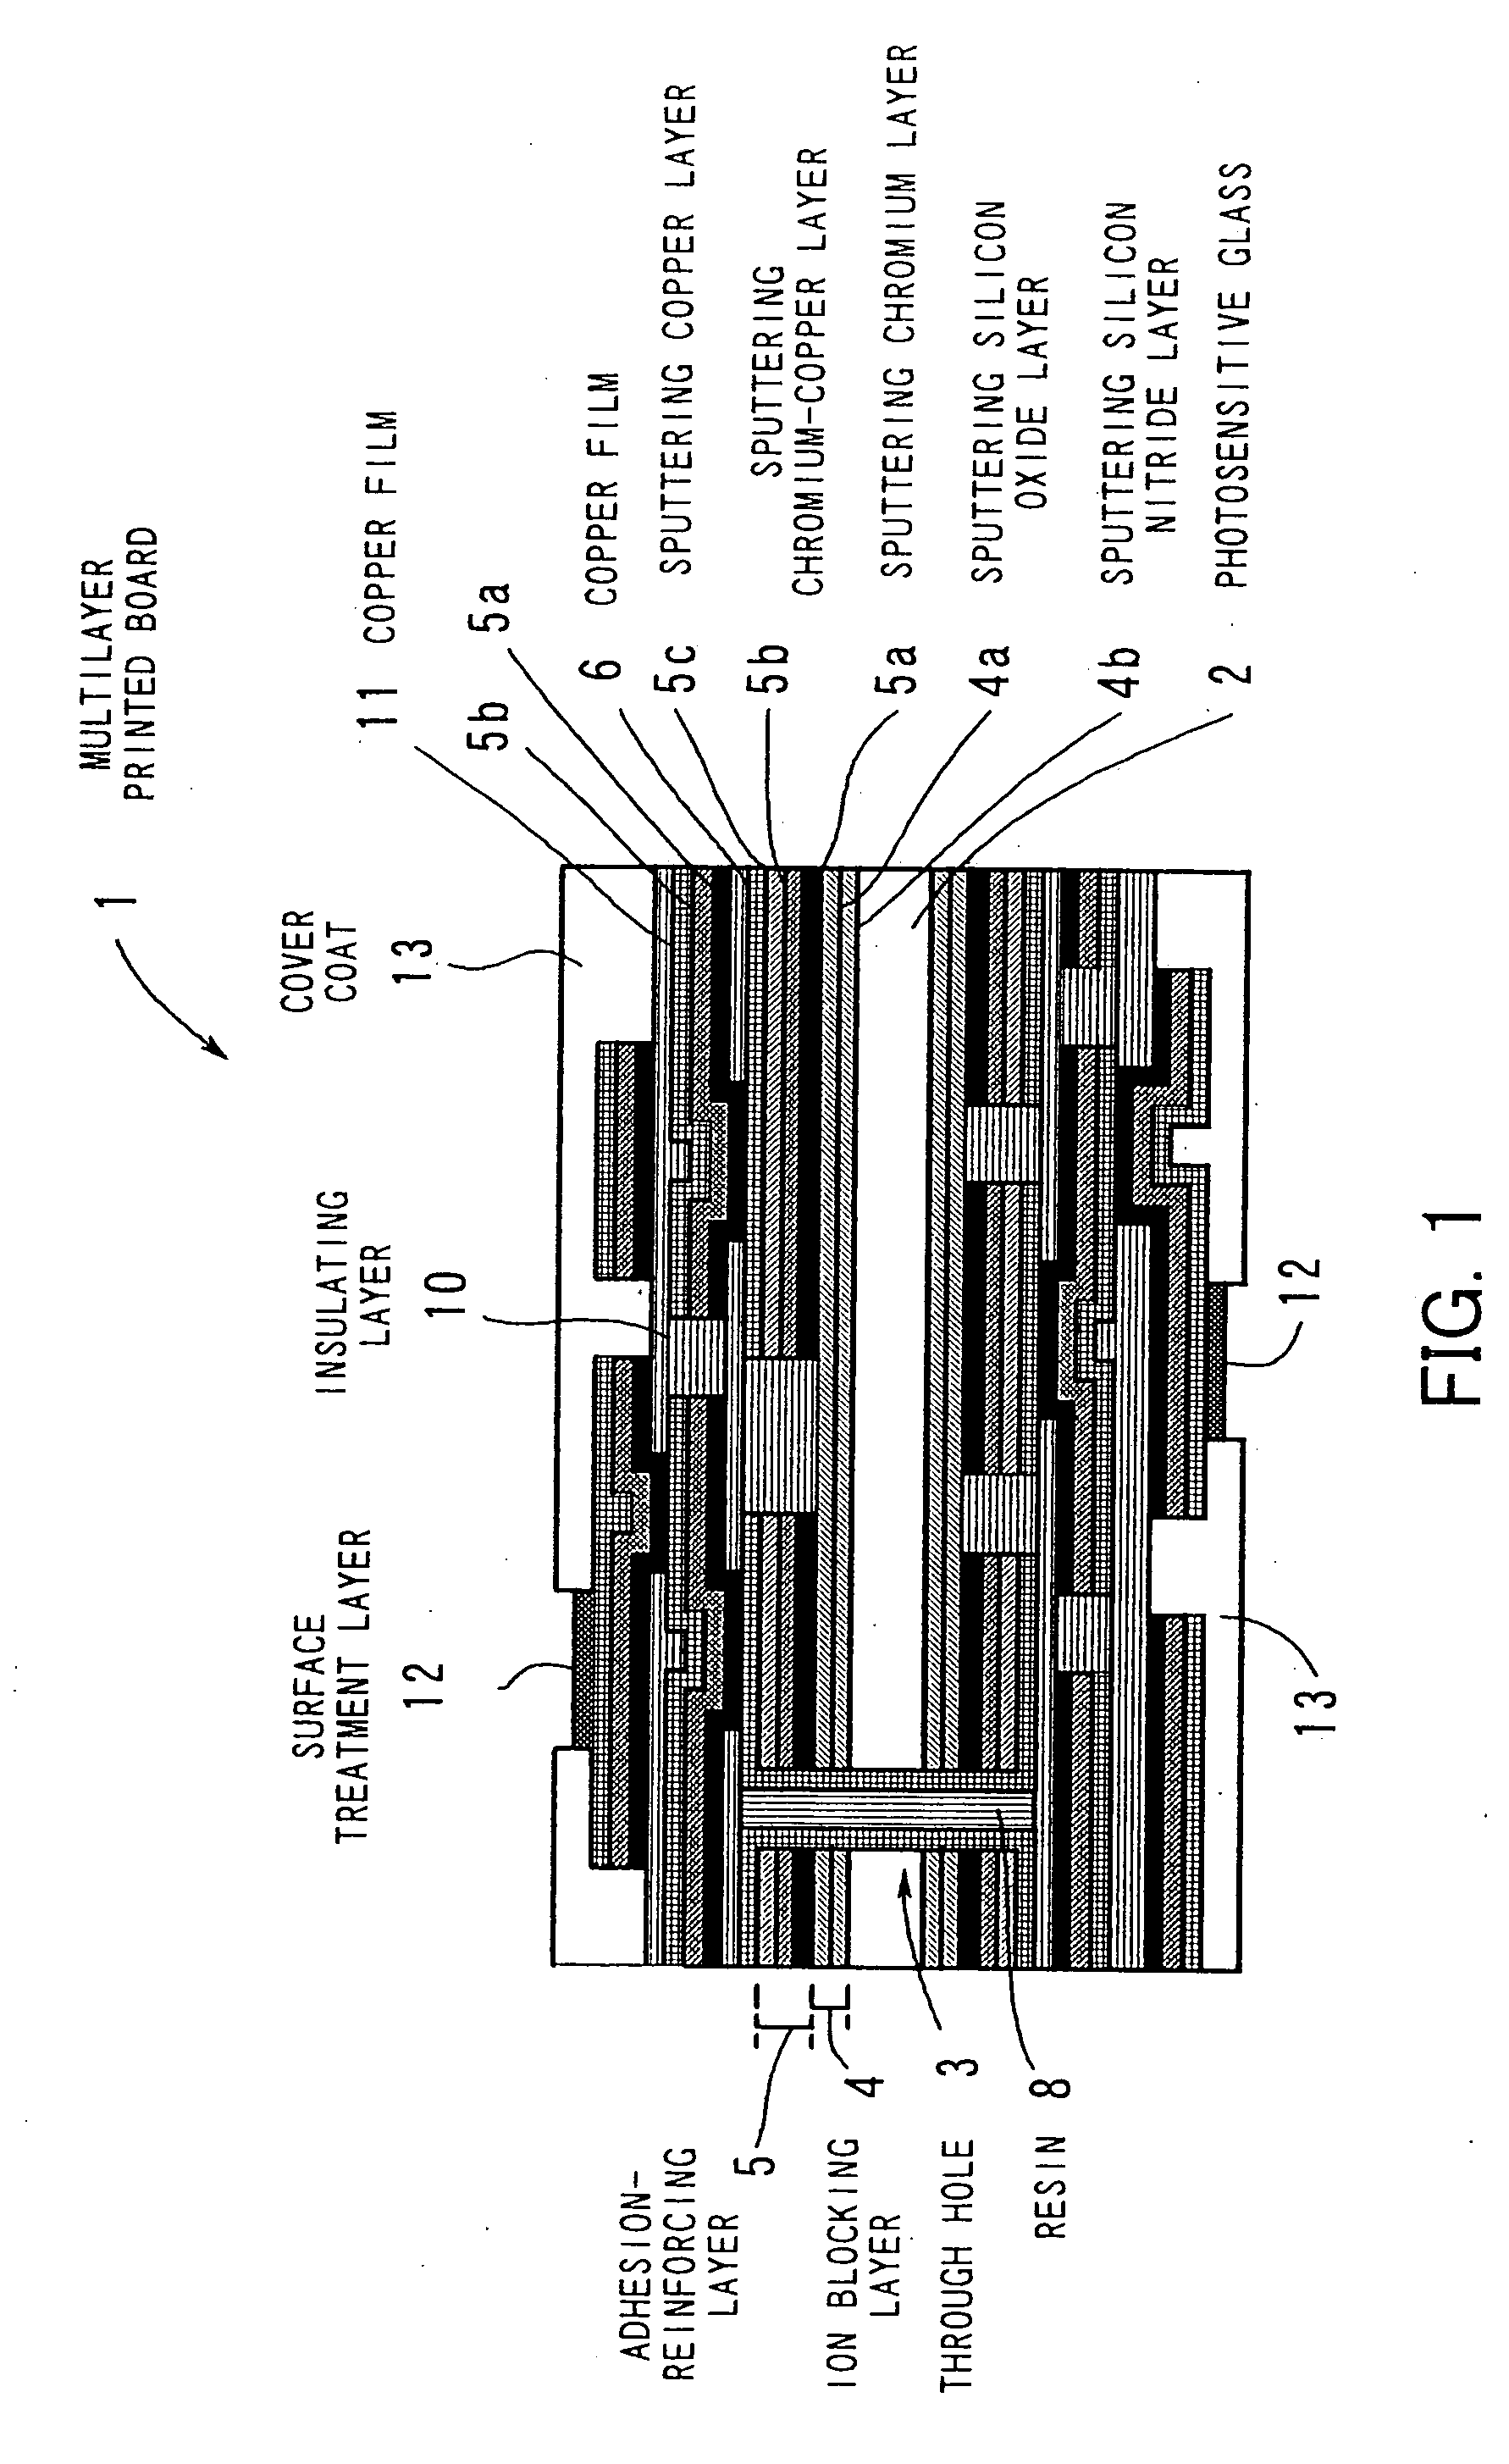 Multilayer printed wiring board and a process of producing same